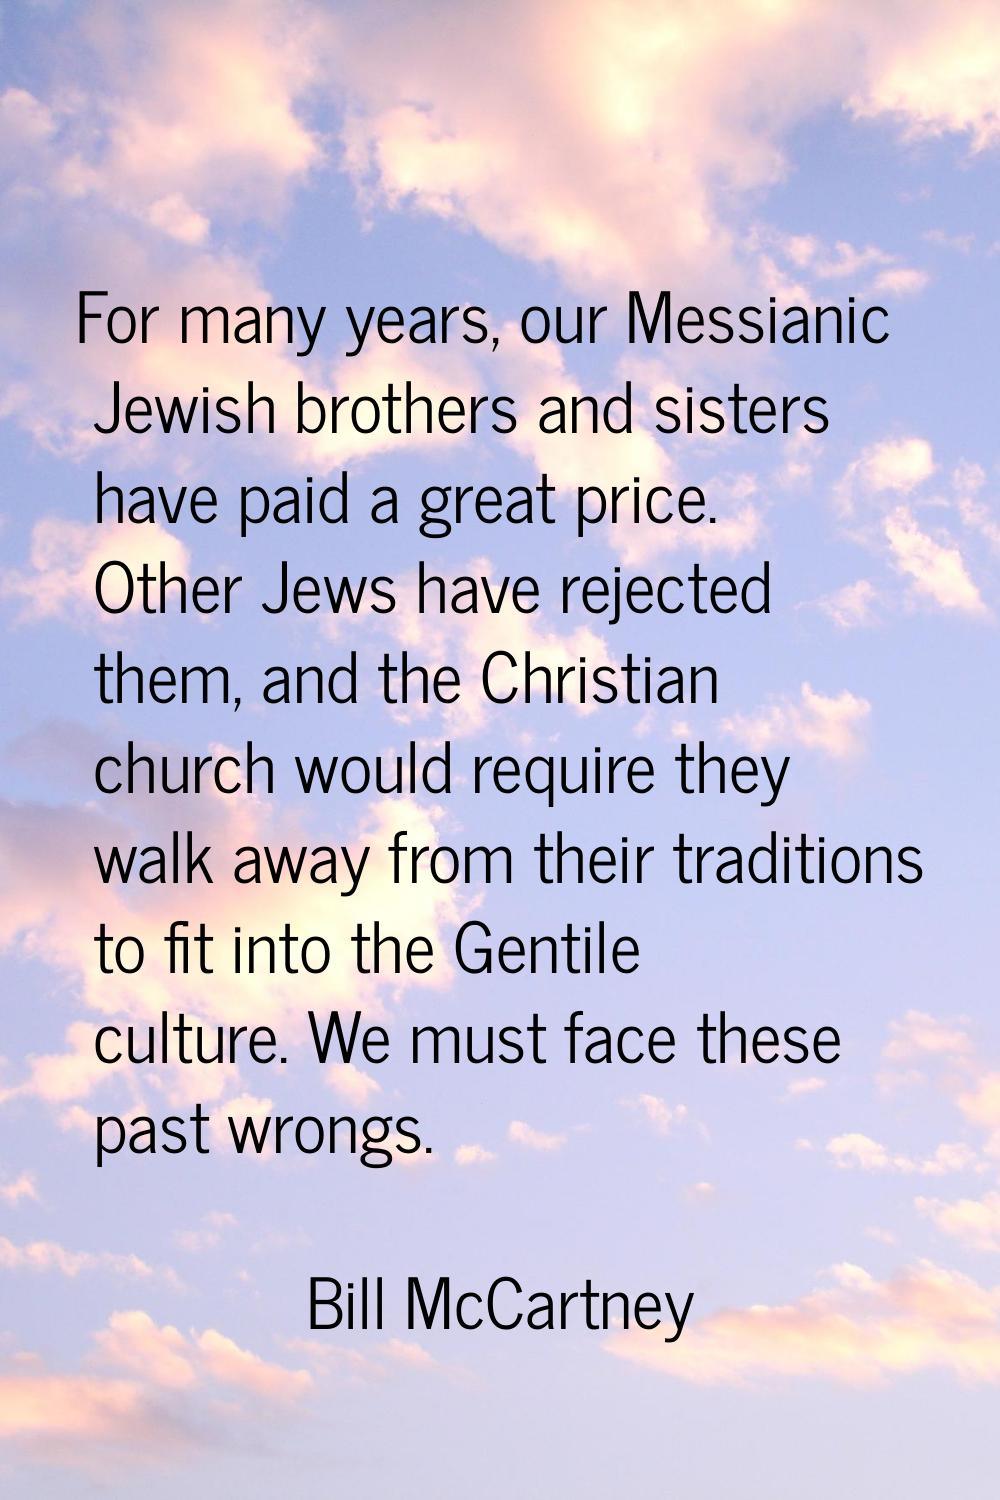 For many years, our Messianic Jewish brothers and sisters have paid a great price. Other Jews have 